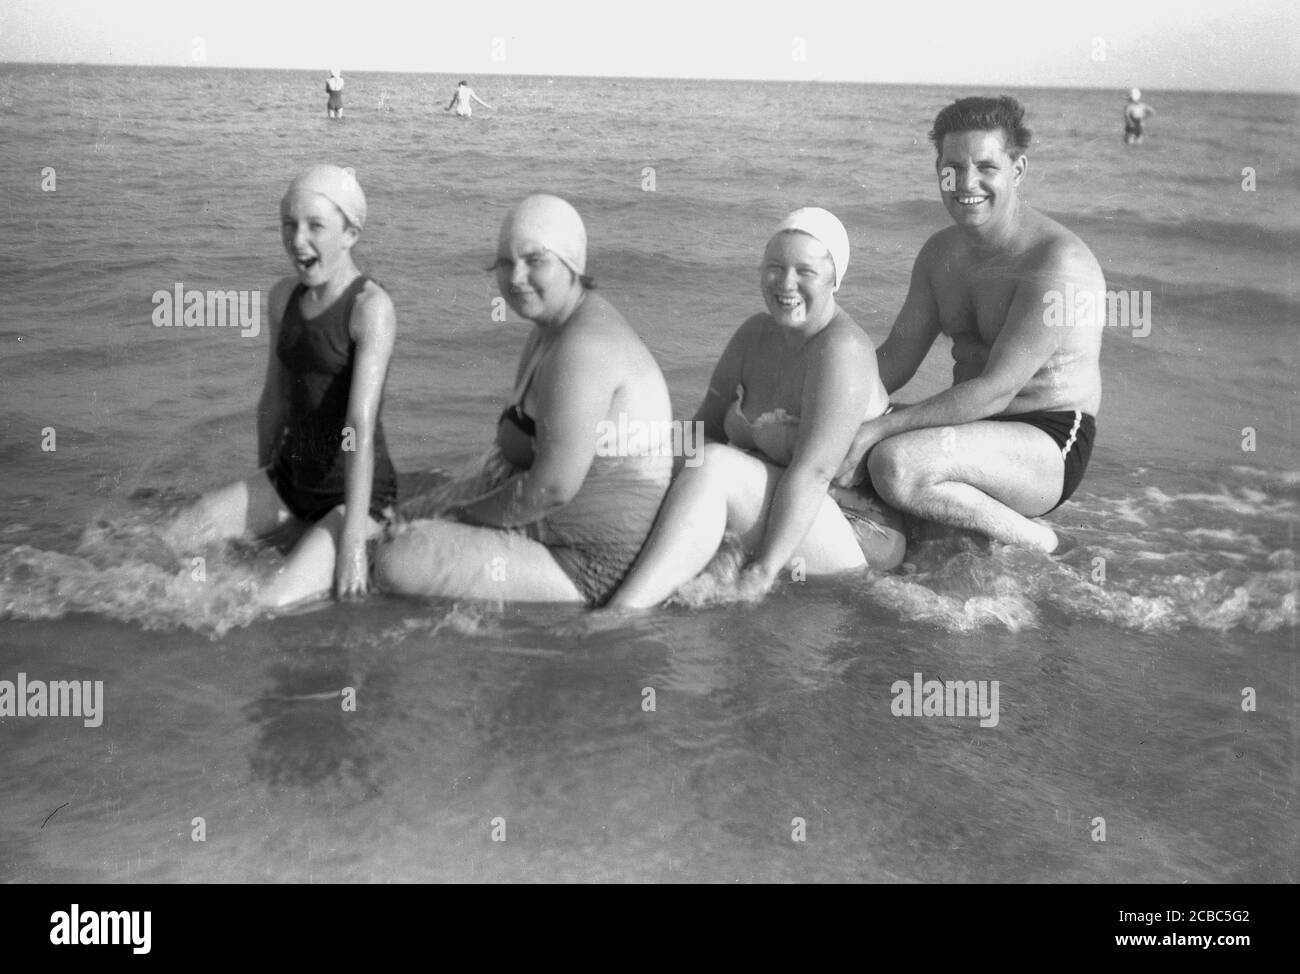 1950s, historical, at the seaside, a family having fun on their holiday sitting in the shallow waters of the ocean, posing for a photo, England, UK. Stock Photo